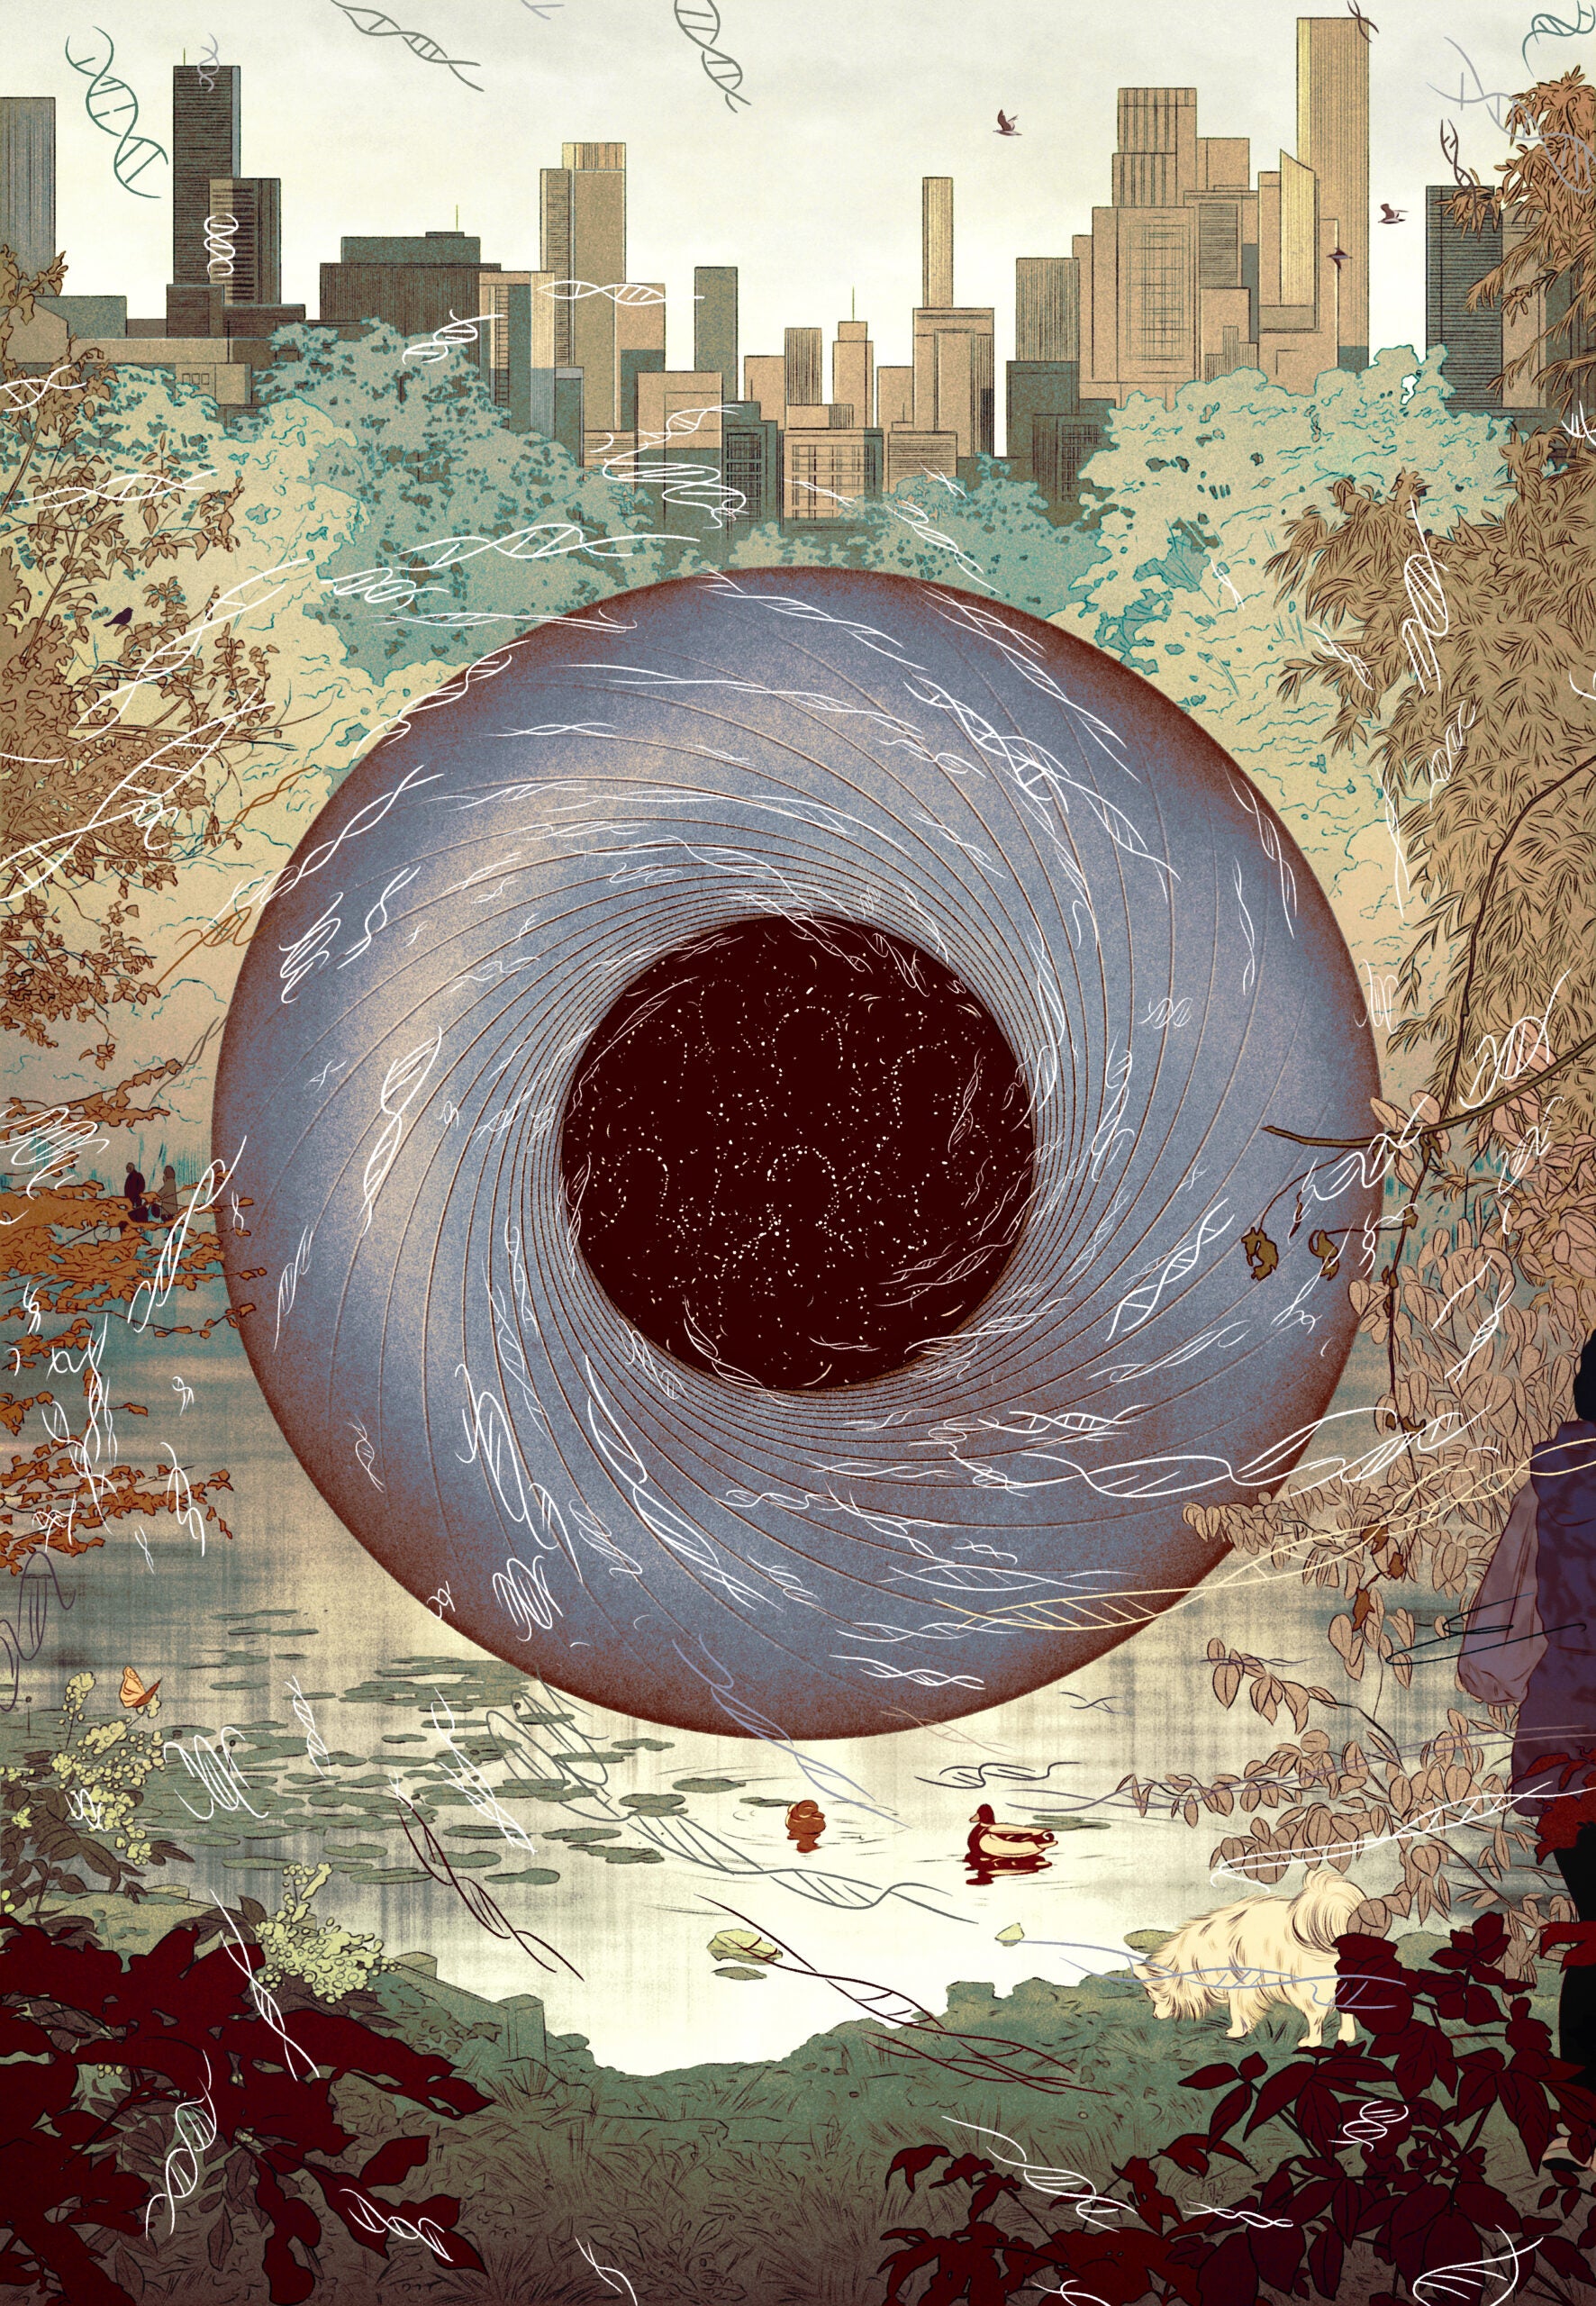 An illustration featuring a giant eye